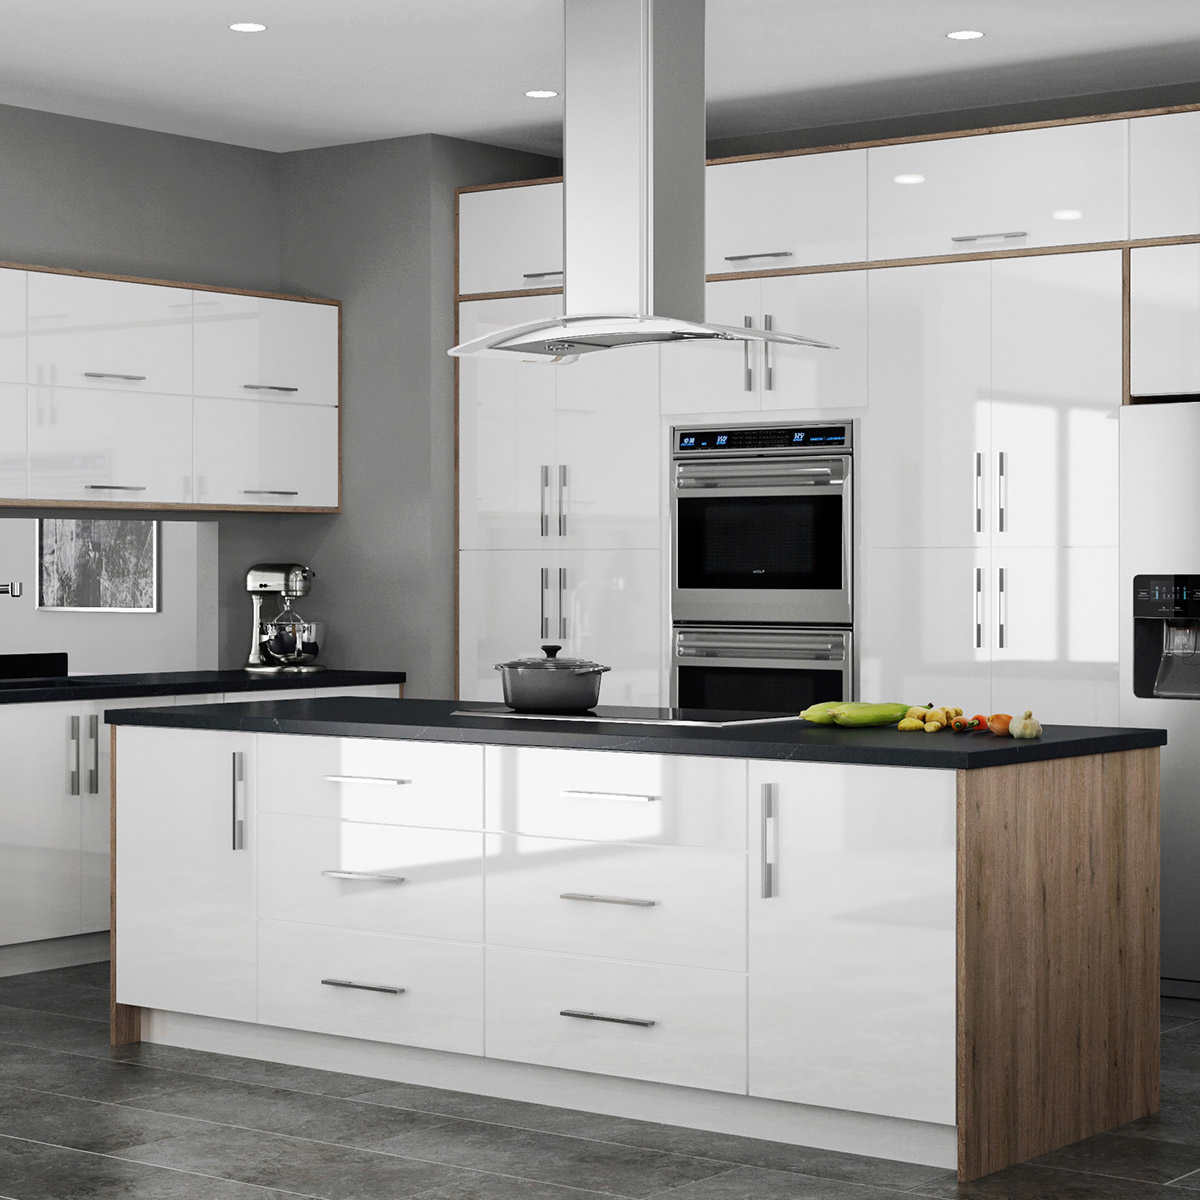 Metropolitan Kitchen And Bath Cabinets By All Wood Cabinetry